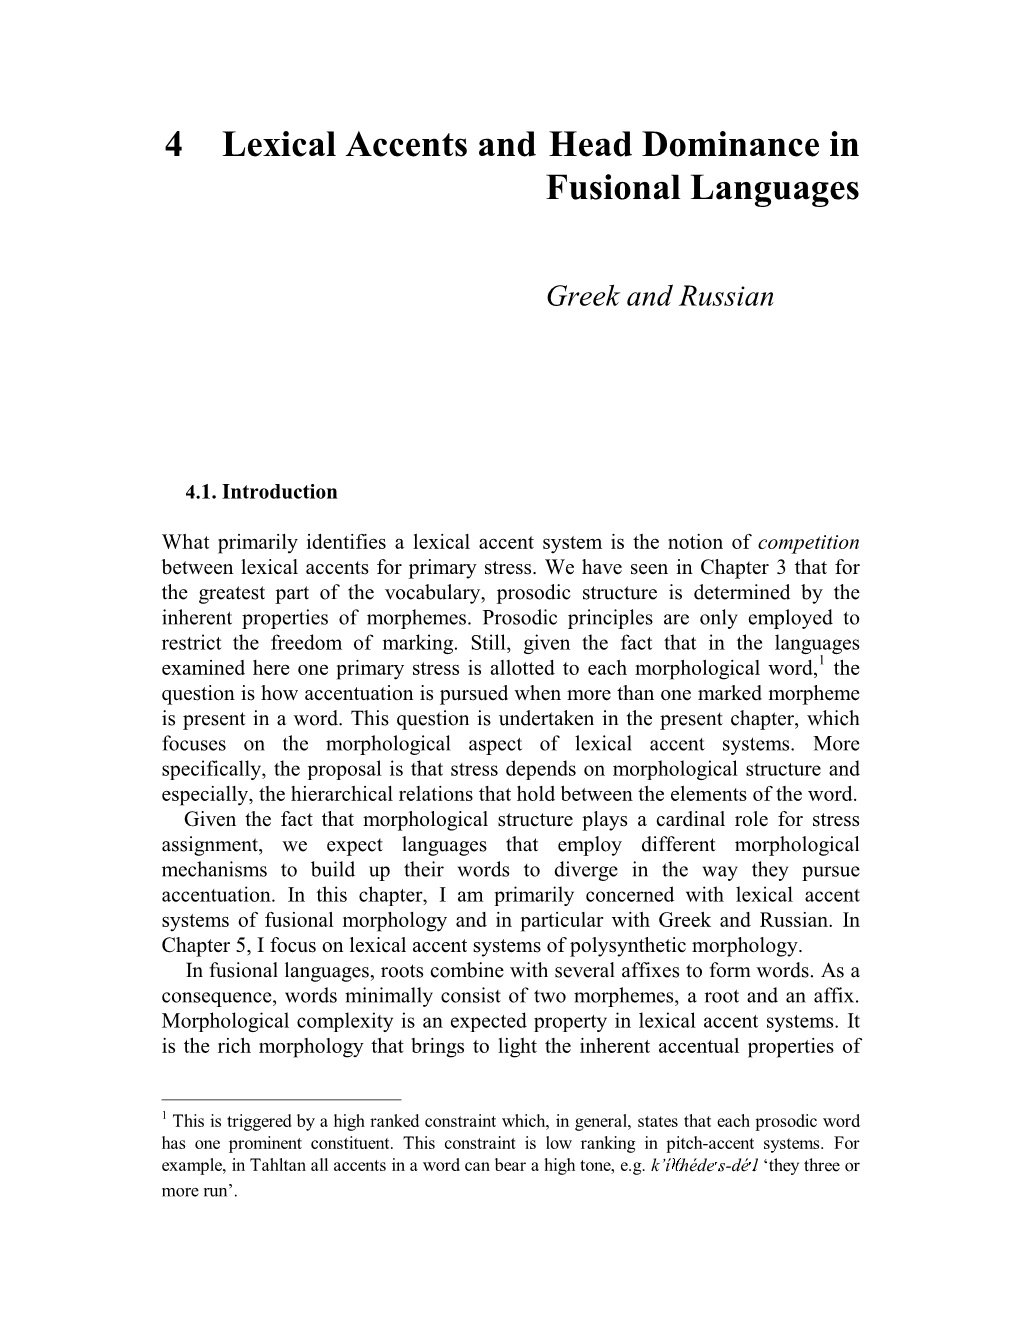 4 Lexical Accents and Head Dominance in Fusional Languages